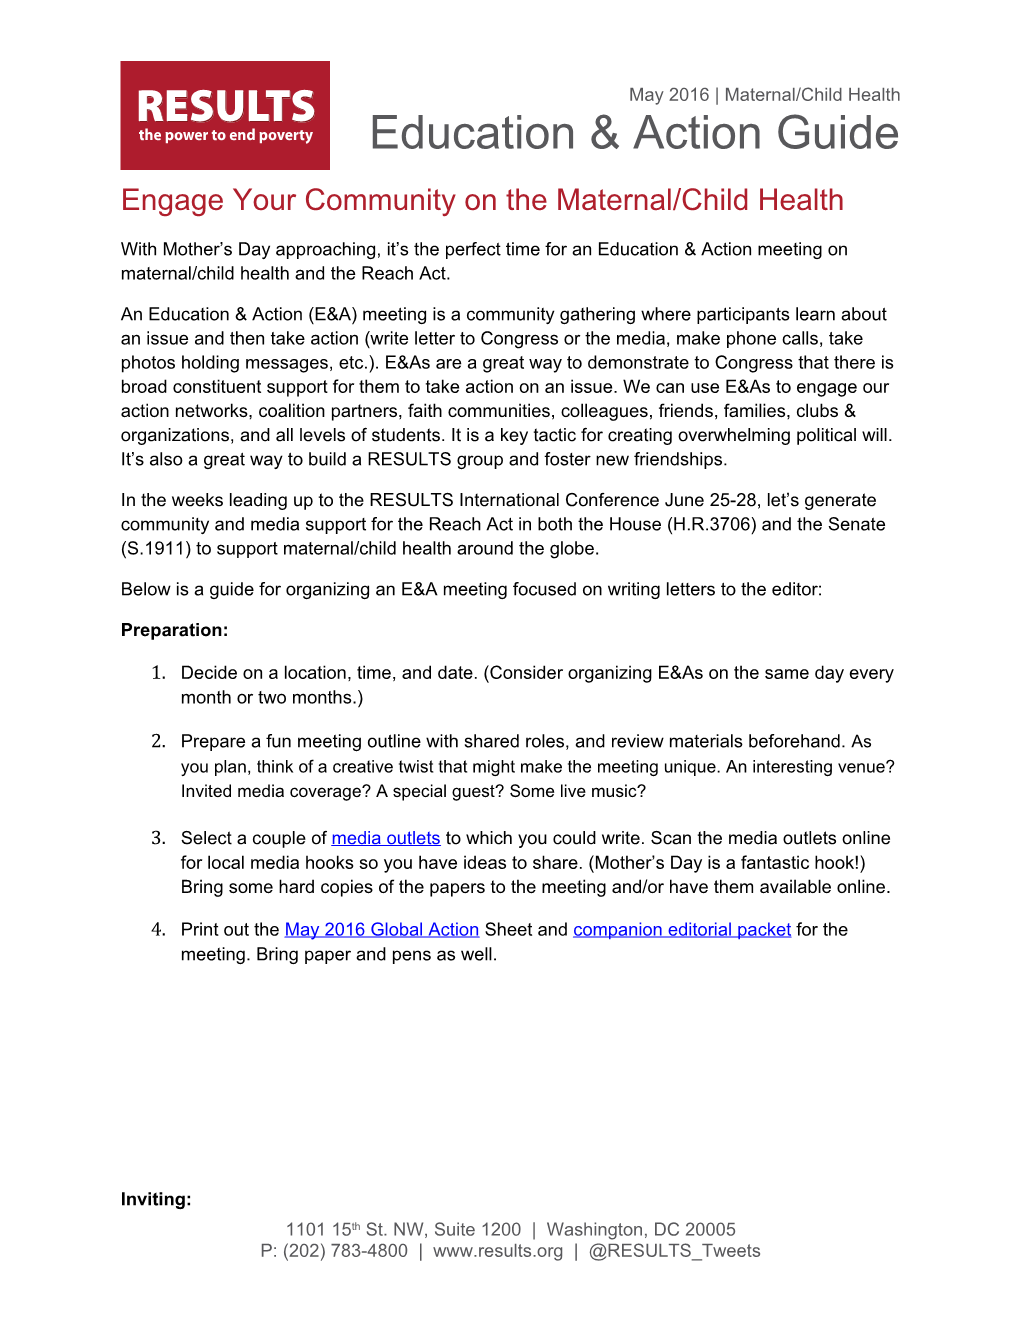 Engage Your Community on the Maternal/Child Health